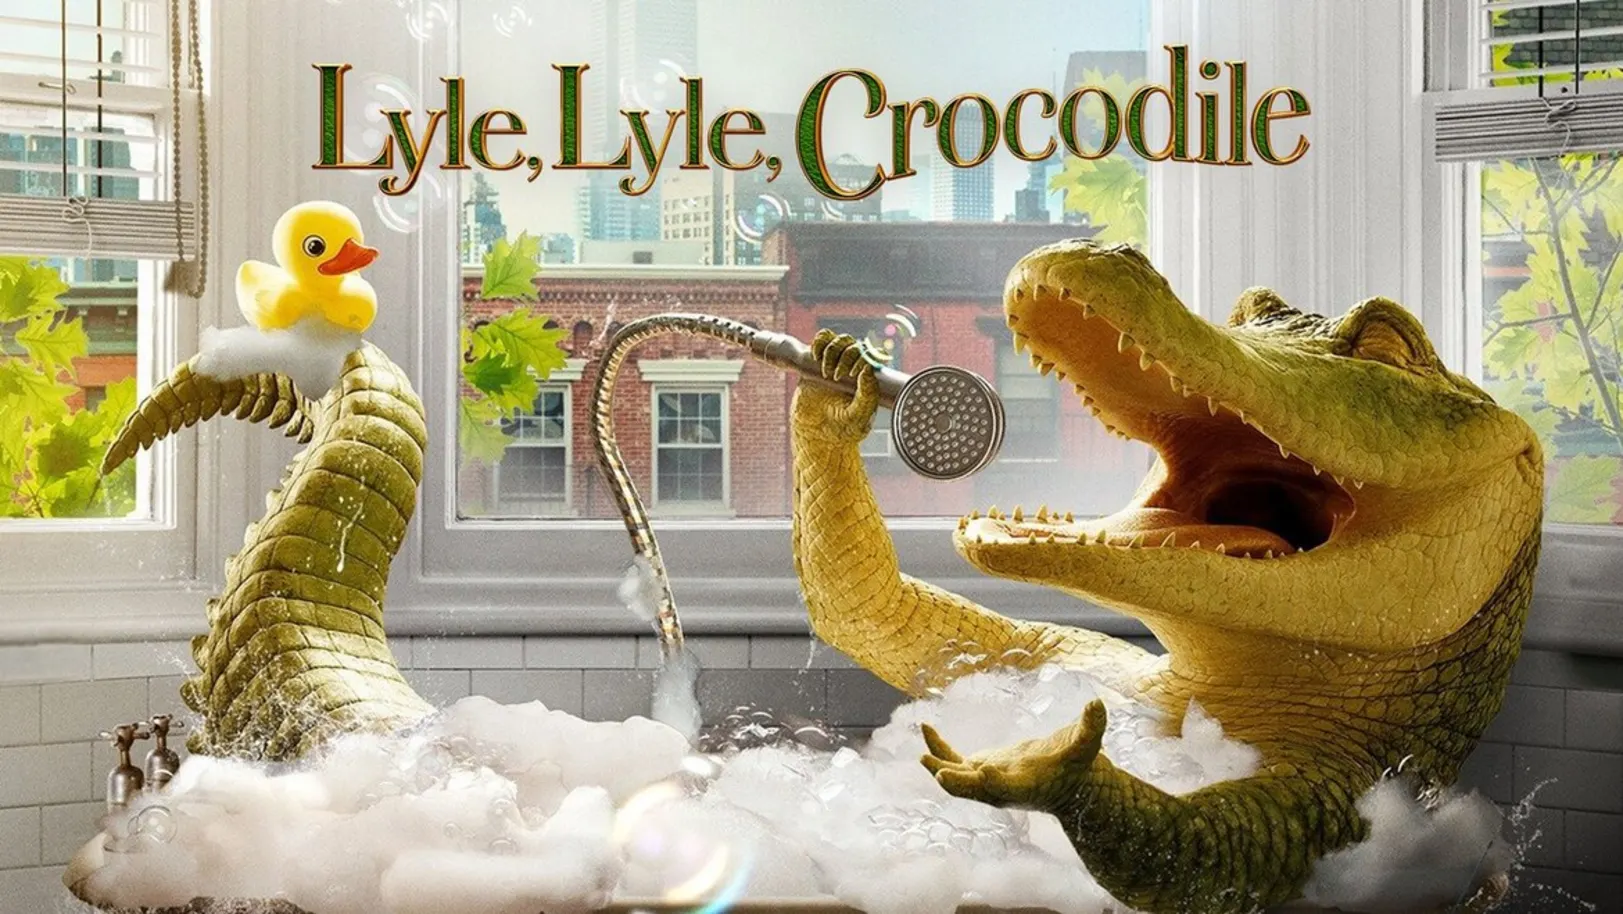 Lyle, Lyle, Crocodile Streaming Now On &Pictures